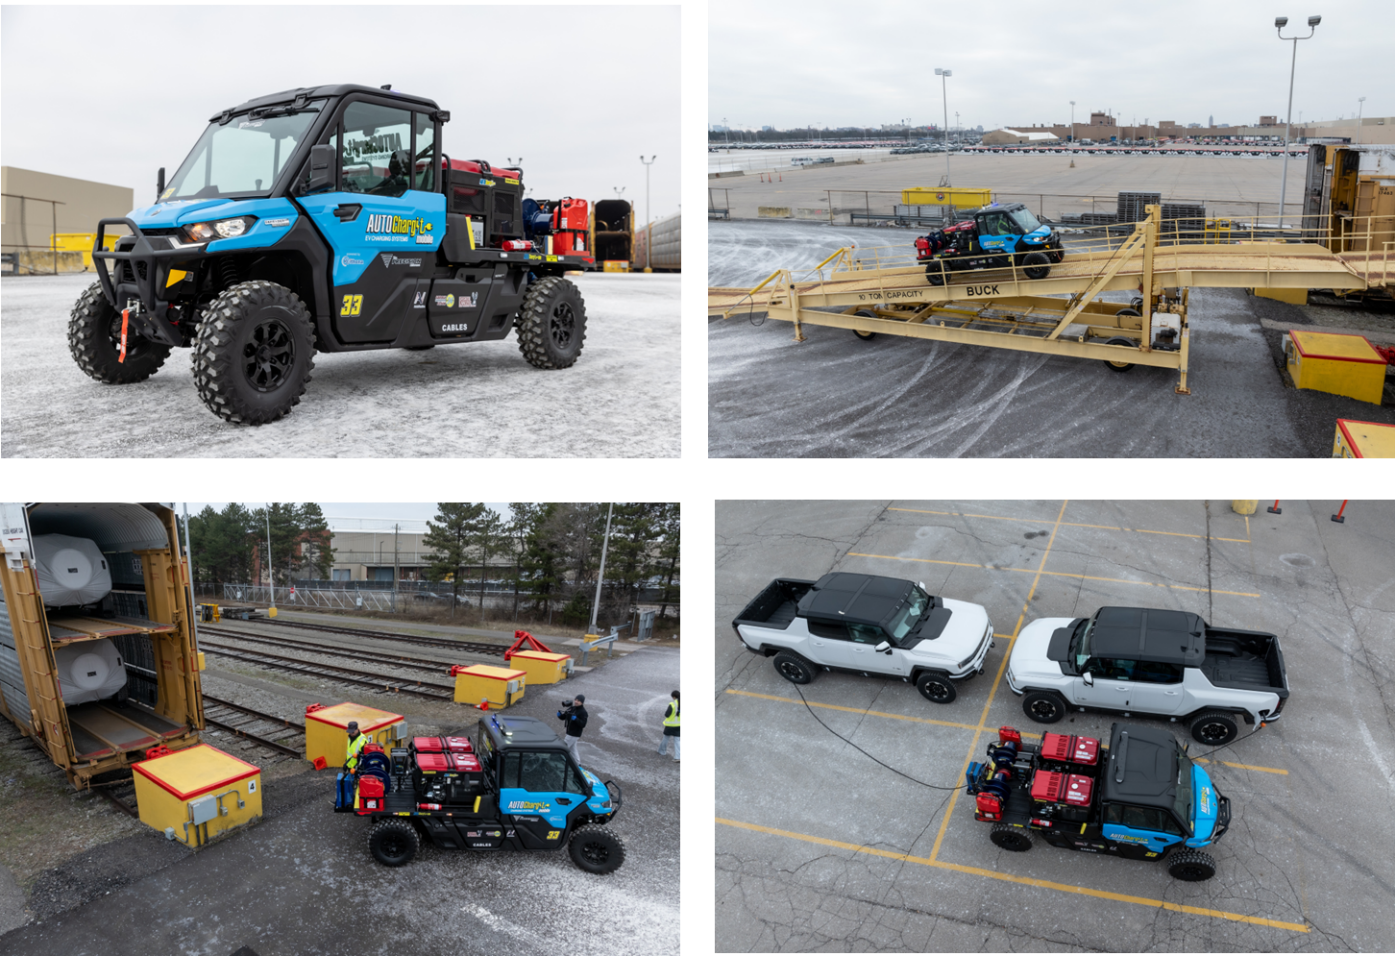 AUTOChargit Mobile UTV Twin L2 EVC entering the train via a ramp, near the side of the train, simultaneously charging 2 EVs in a parking lot.